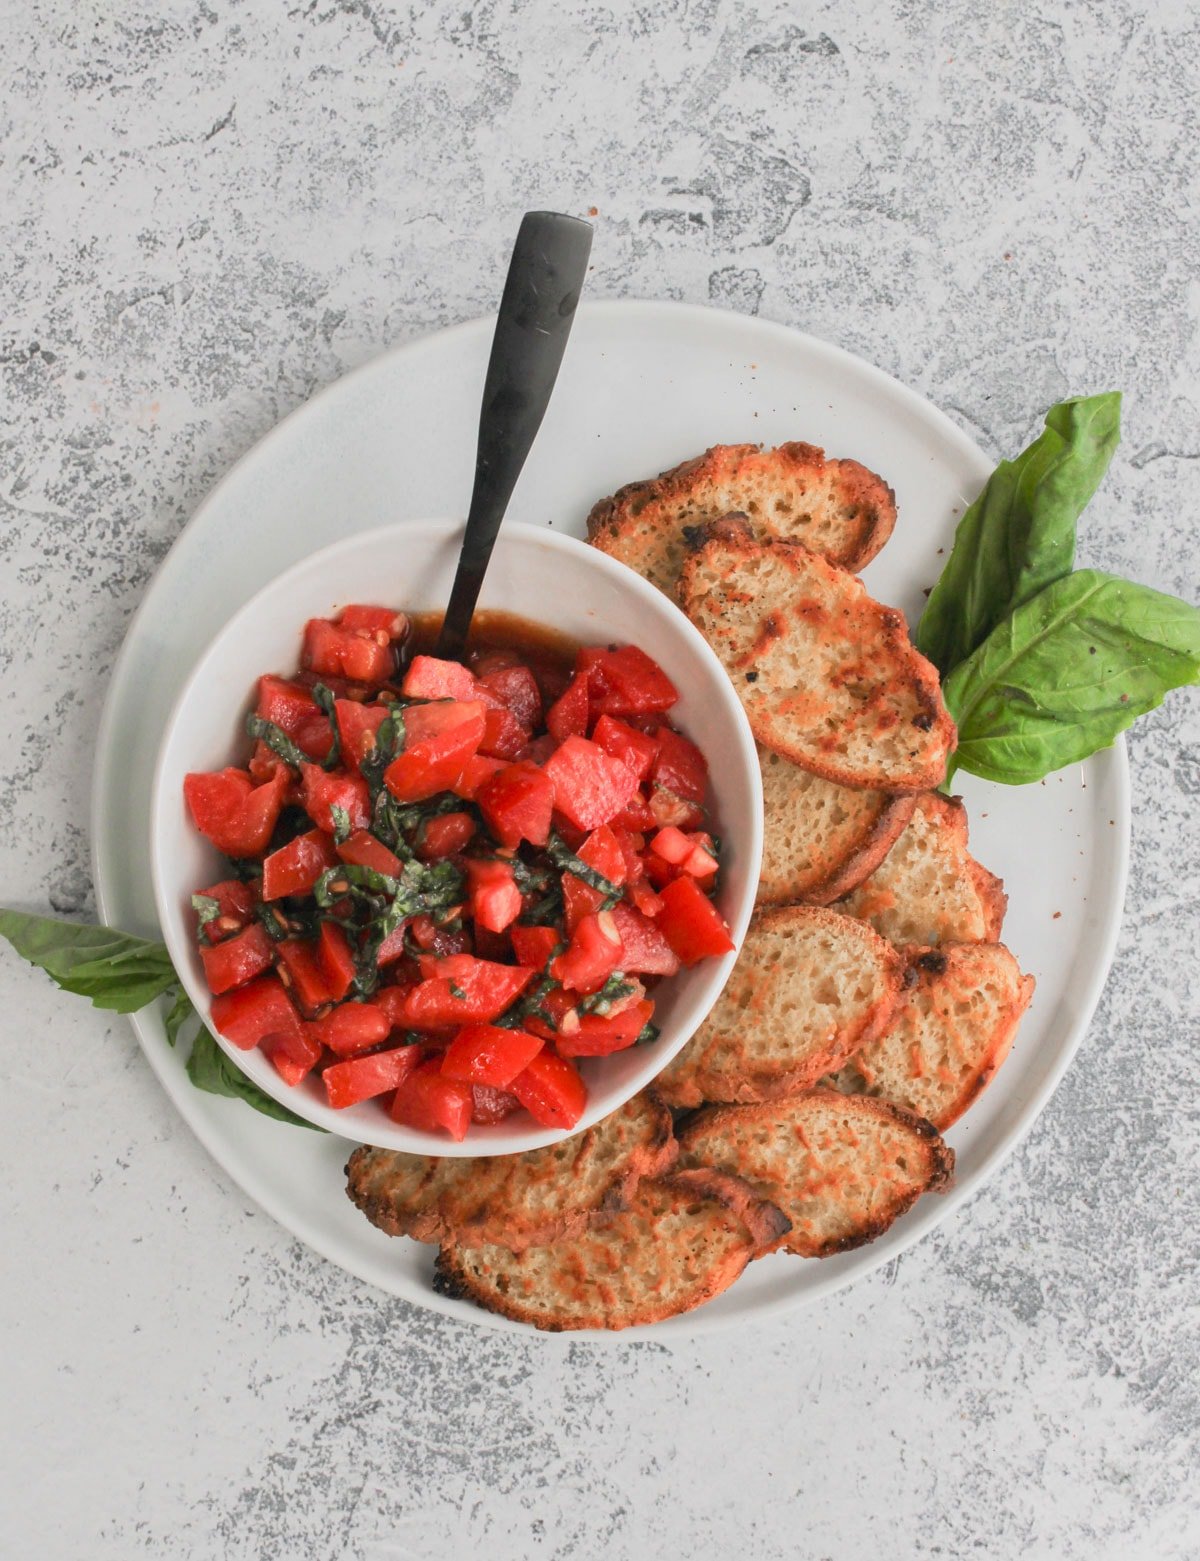 Top view of bruschetta dip in a bowl with toasted French bread